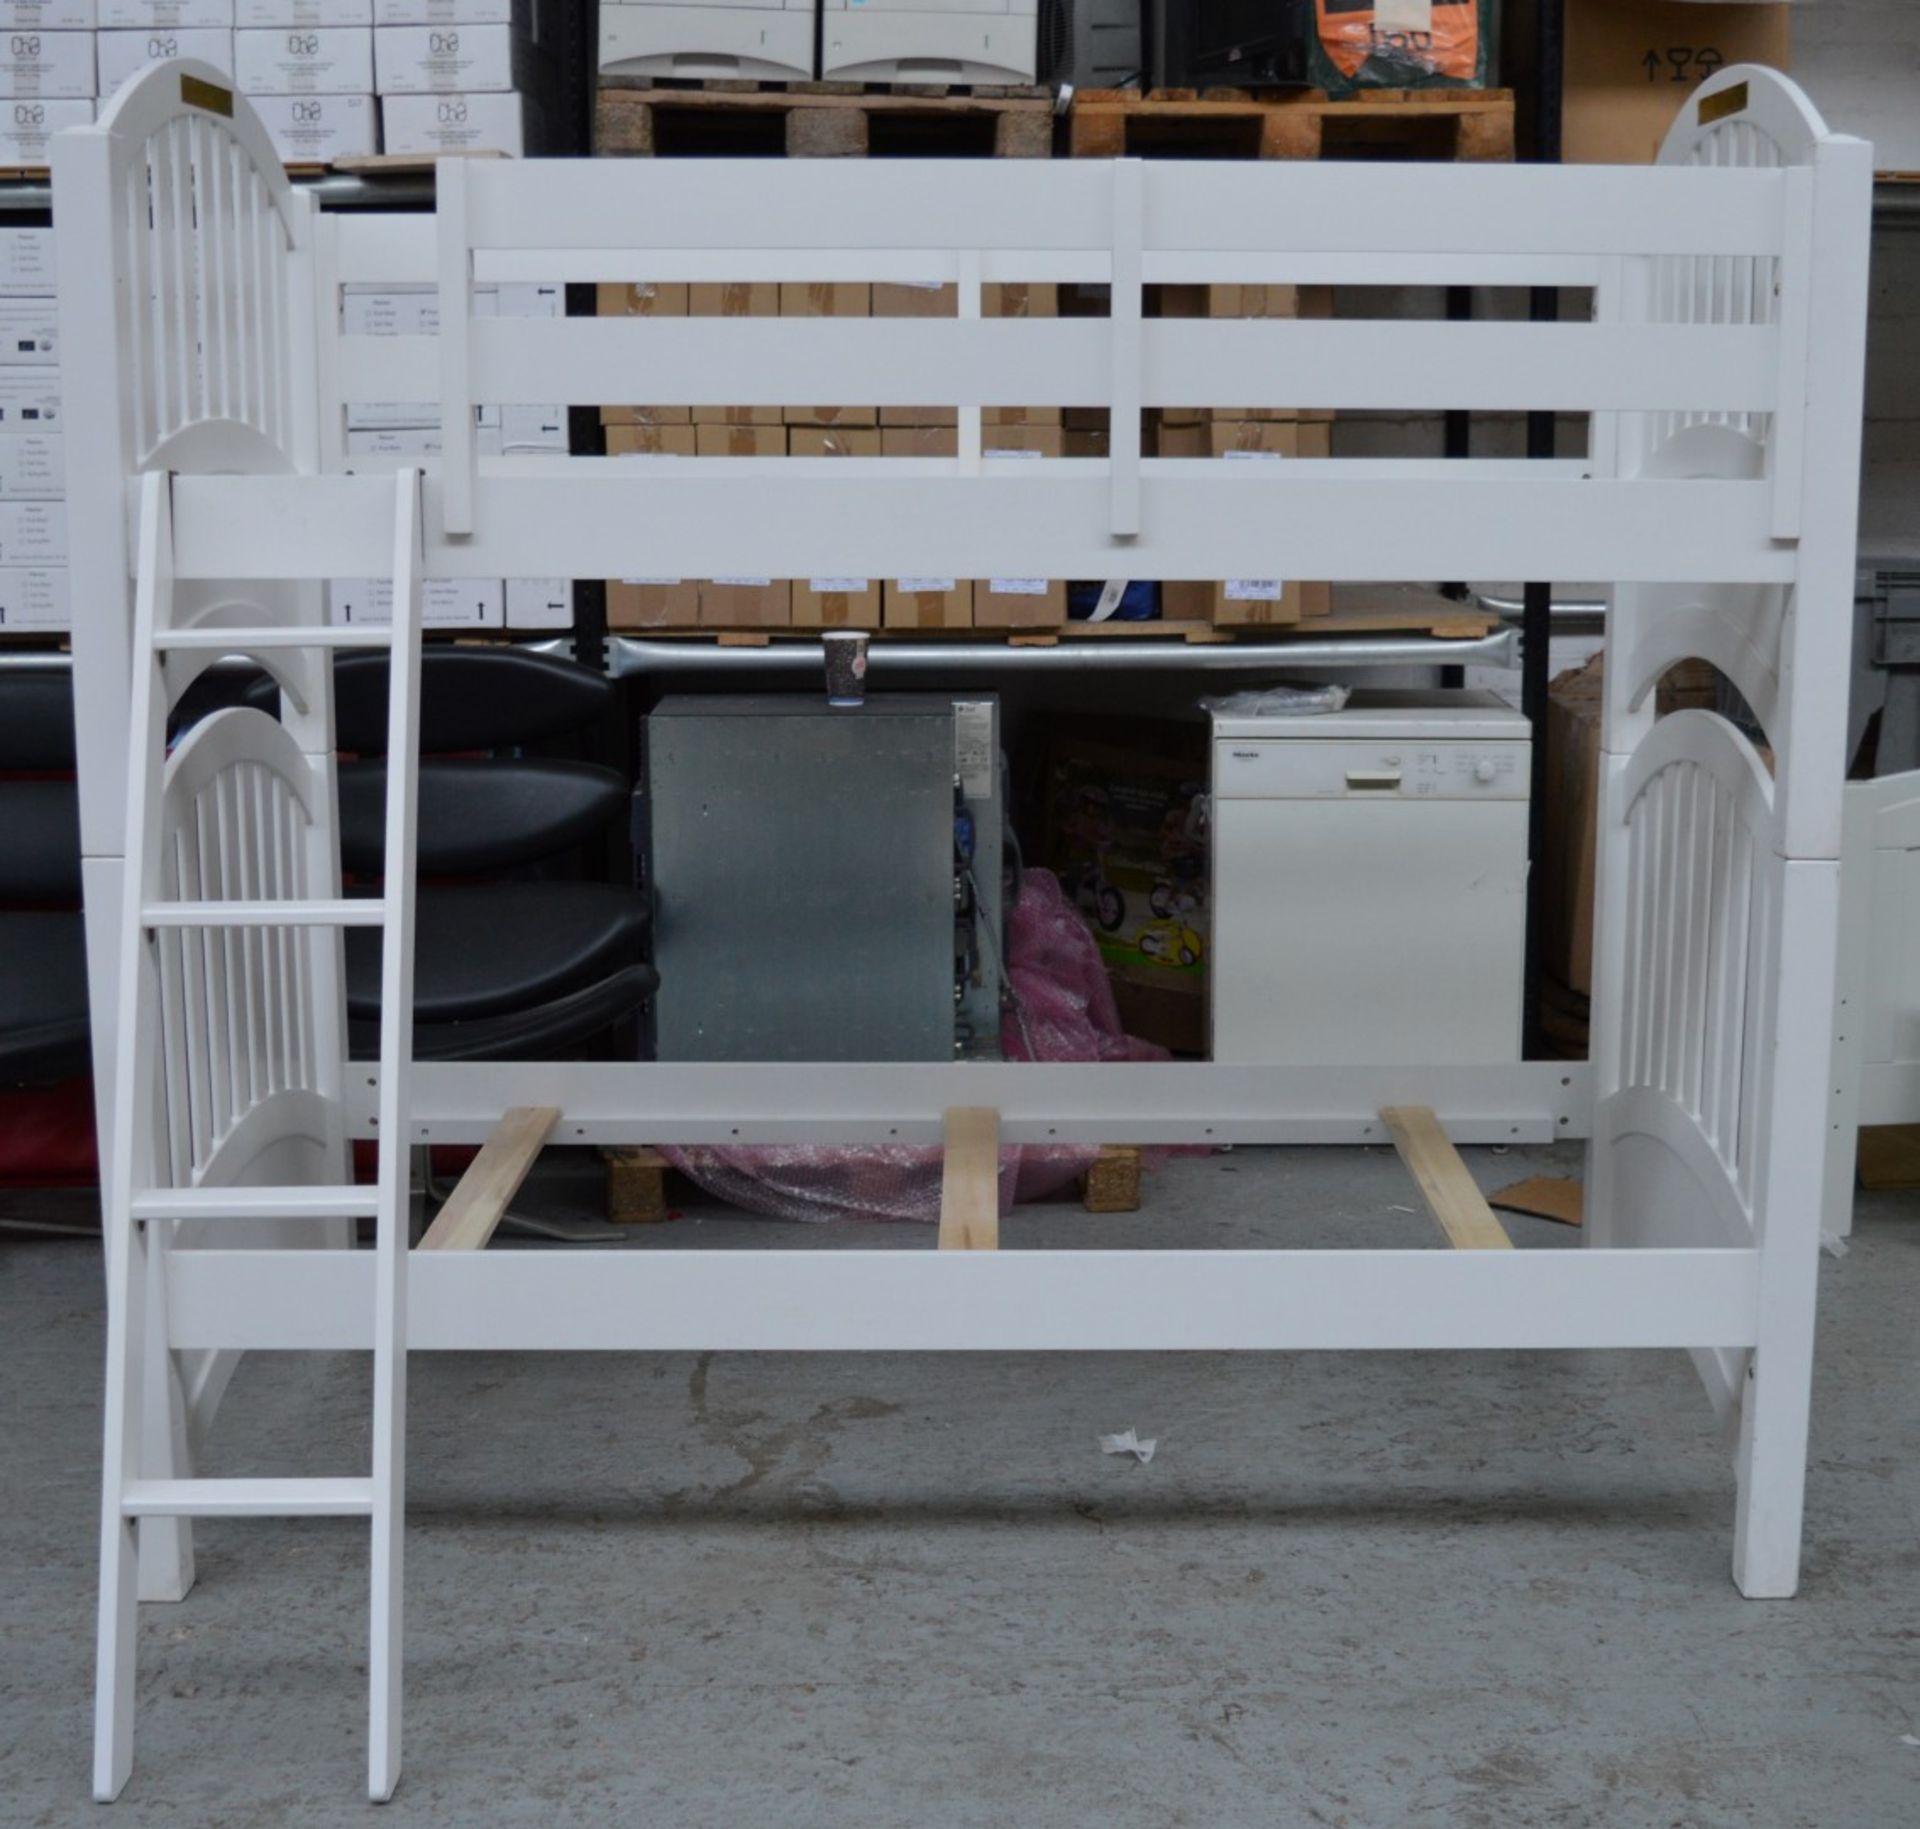 1 x Lea Getaway Twin over Twin Bunk Bed - Unused With Cosmetic Blemishes - CL011 - Pictures to - Image 2 of 13